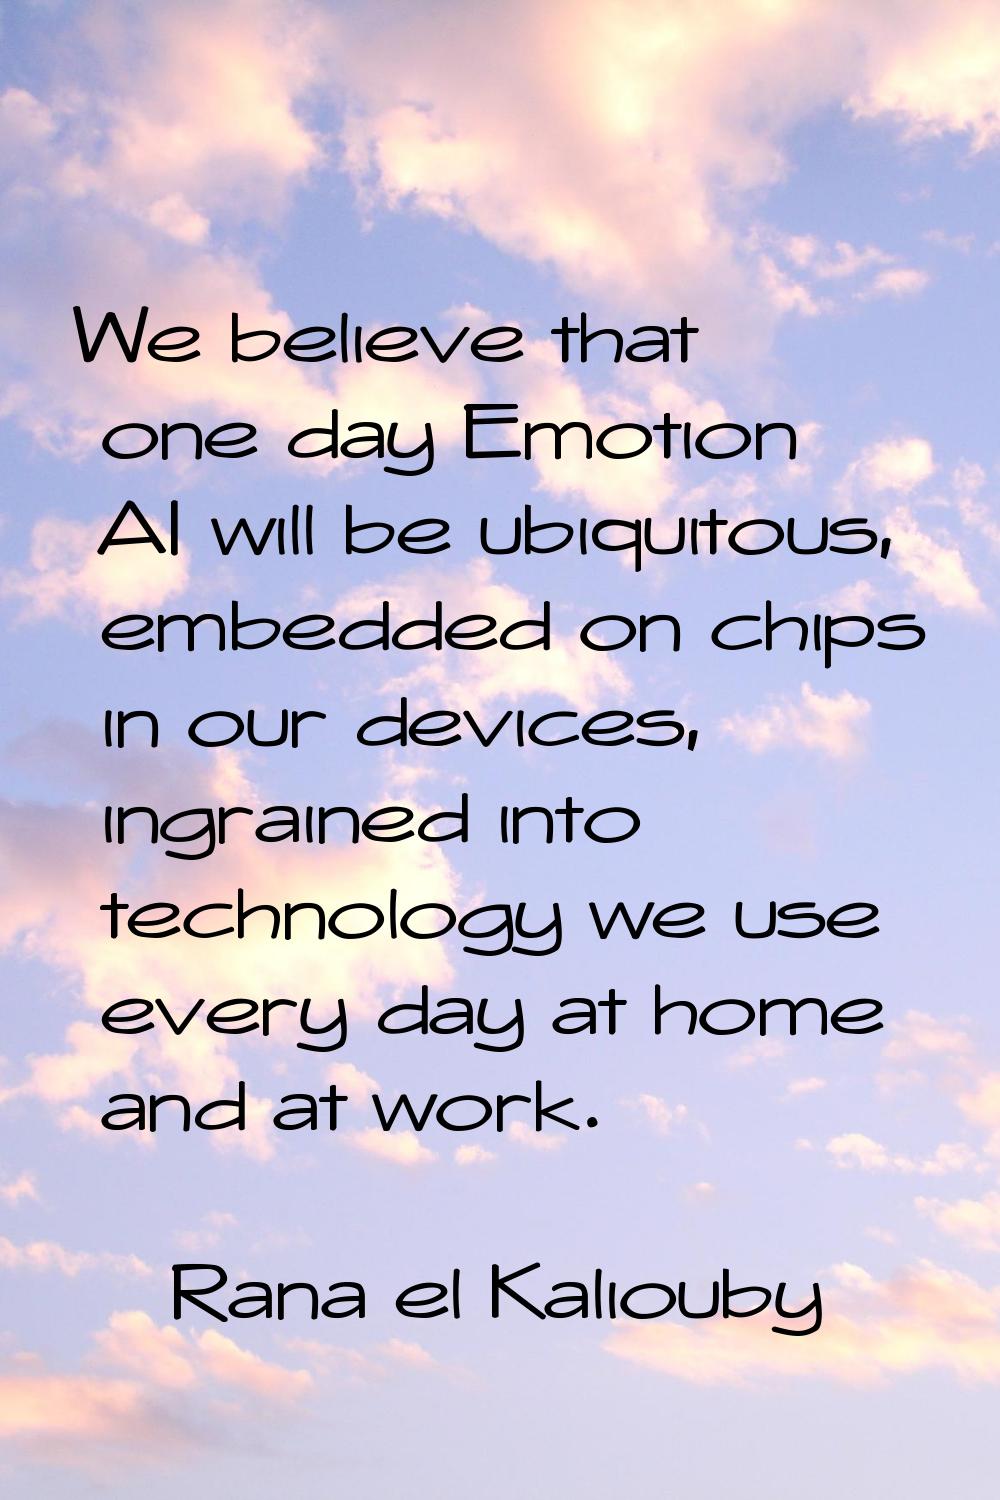 We believe that one day Emotion AI will be ubiquitous, embedded on chips in our devices, ingrained 